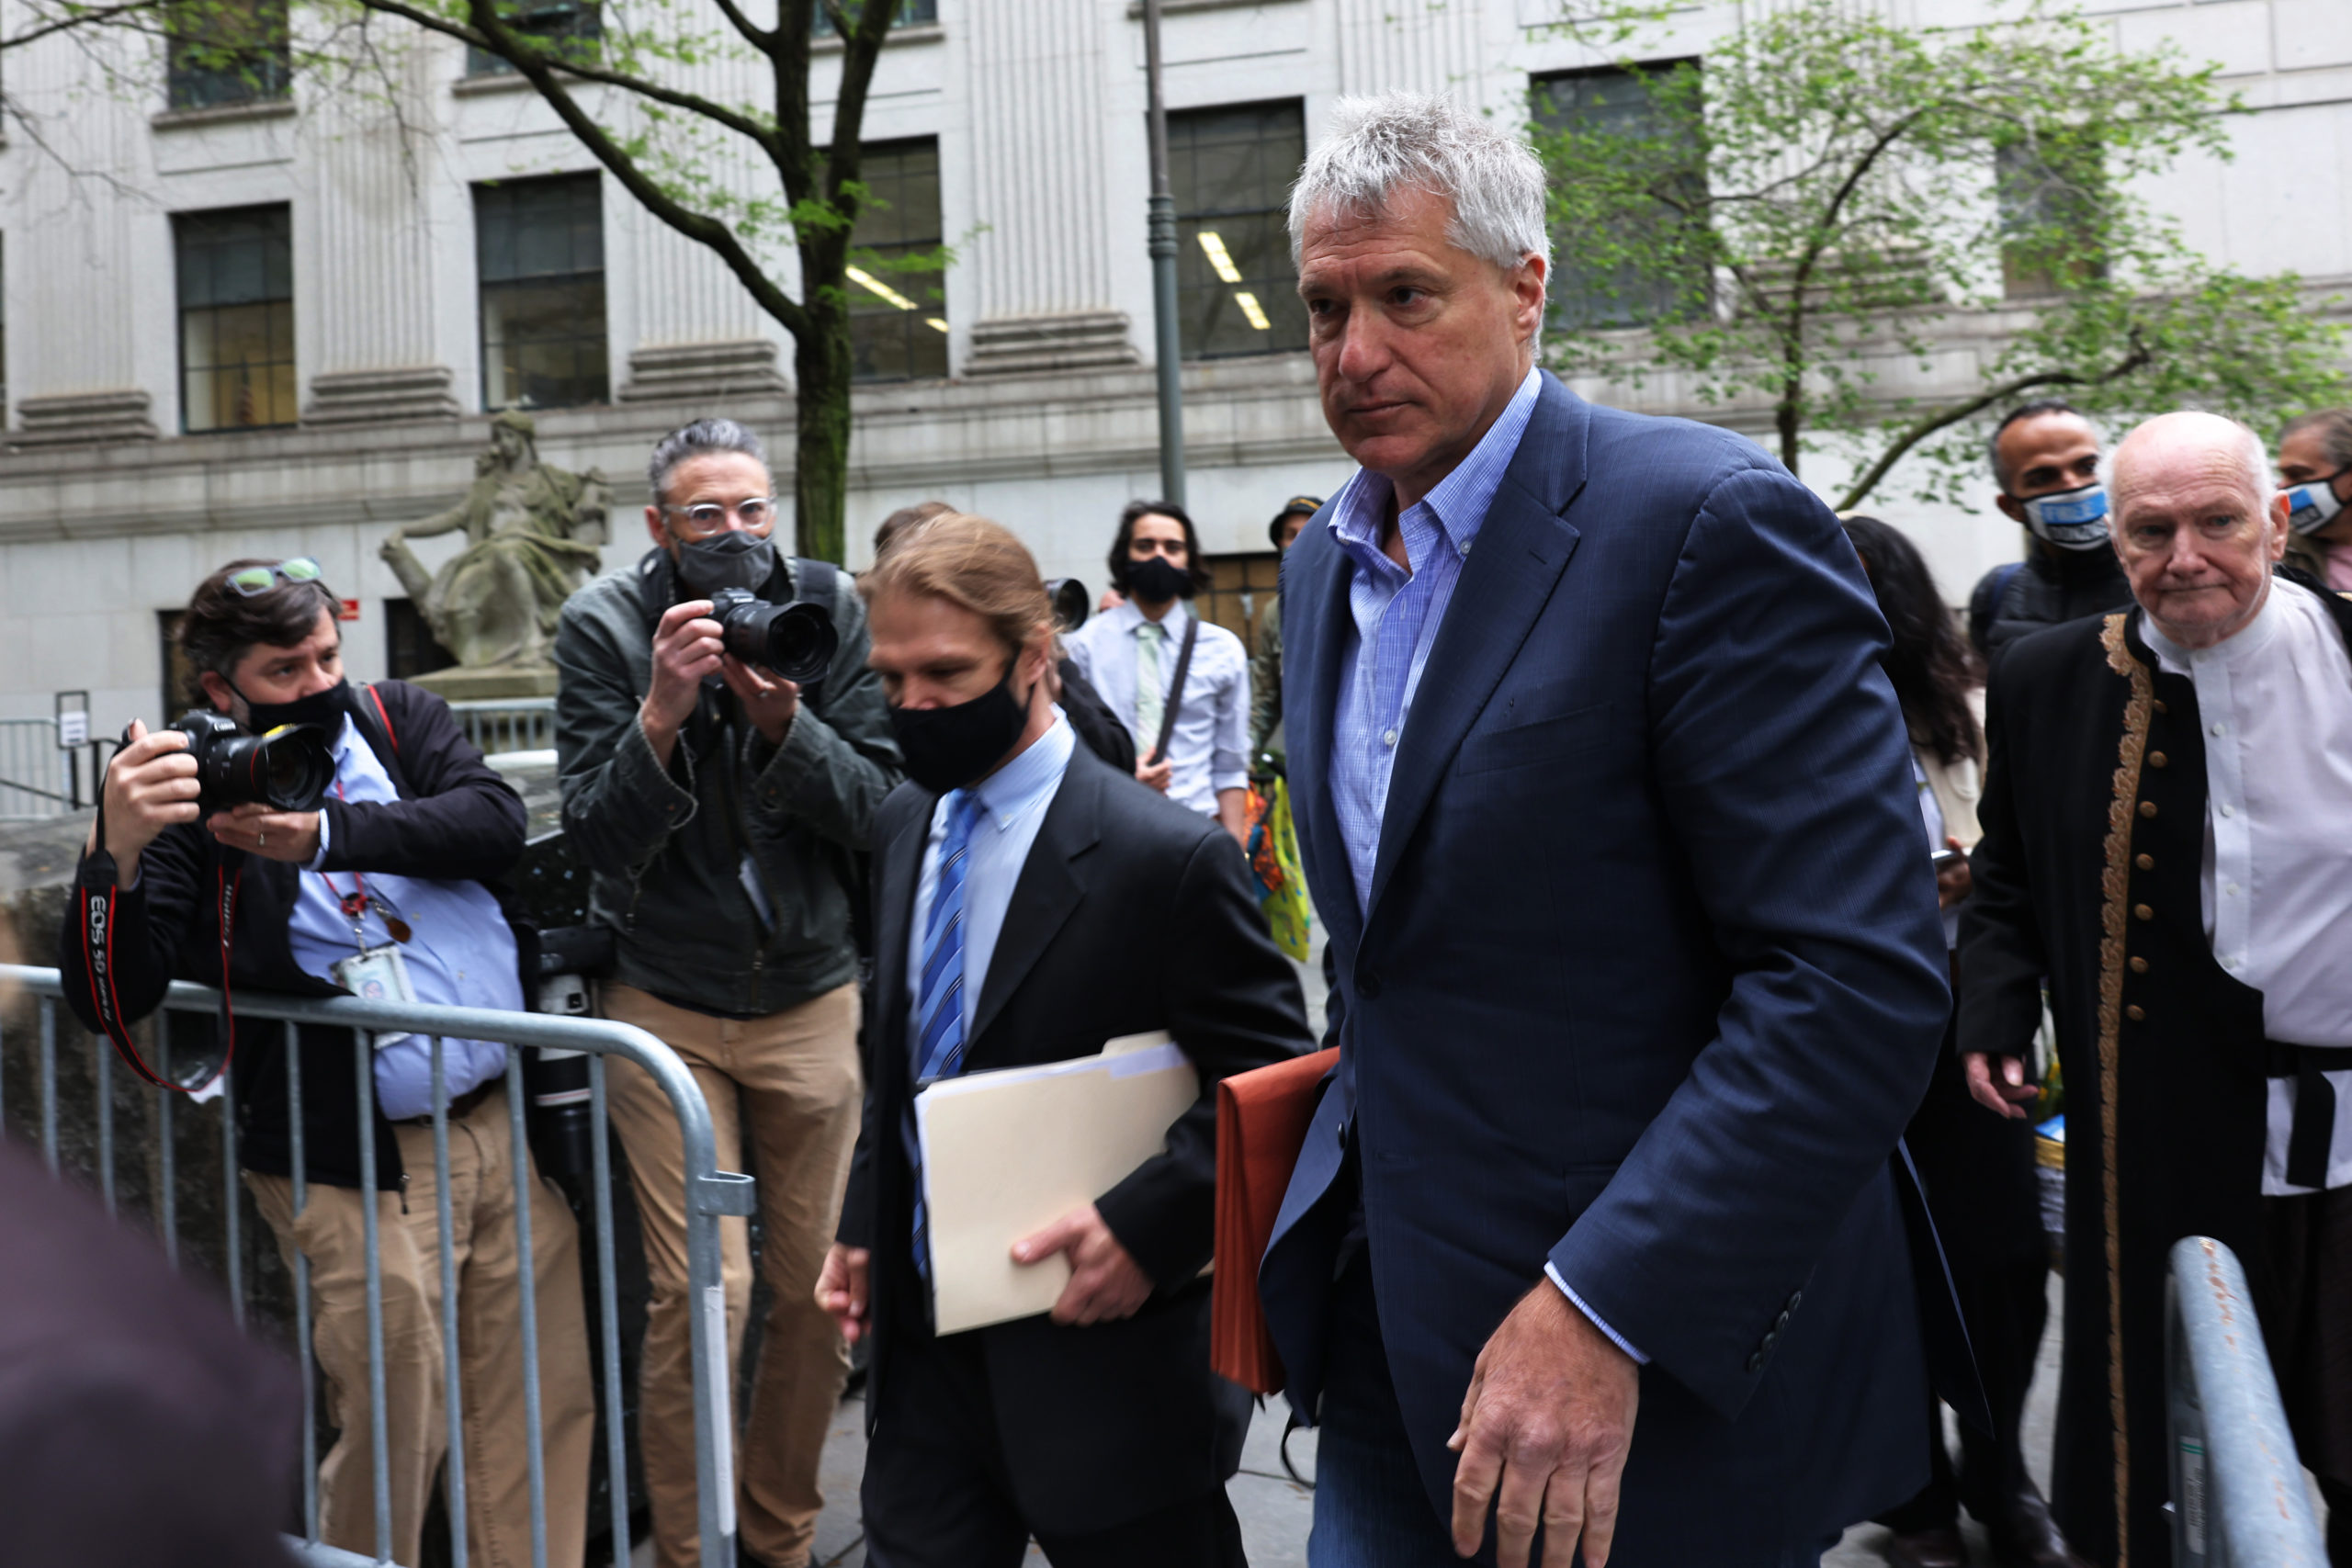 Attorney Steven Donziger arrives for a court appearance at federal court on May 10 in New York City. (Michael M. Santiago/Getty Images)